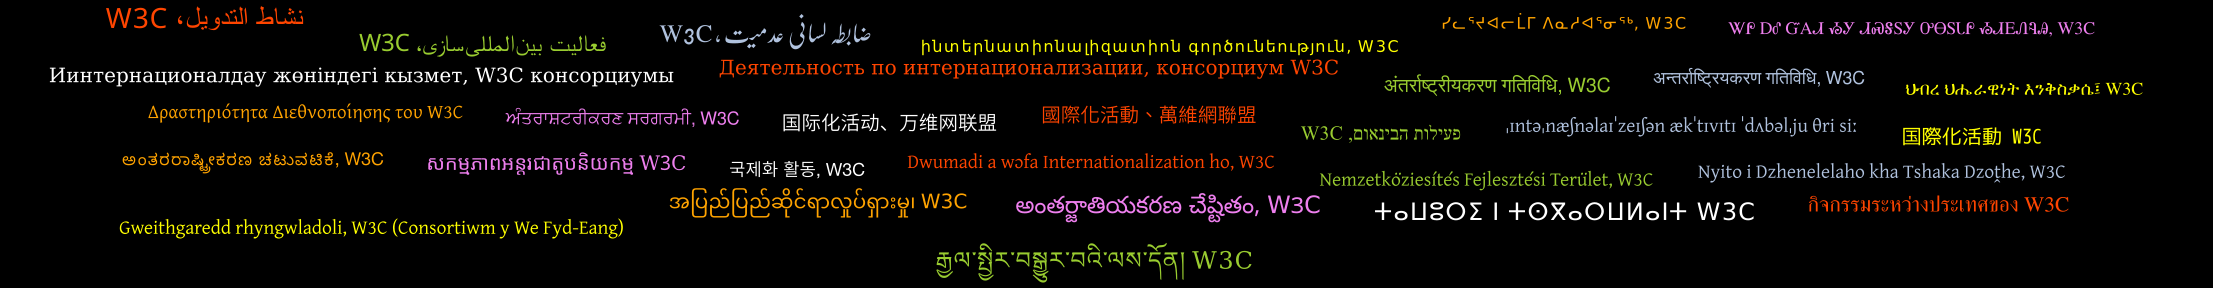 [Image: The phrase "Internationalization Activity, W3C" in different scripts and languages]